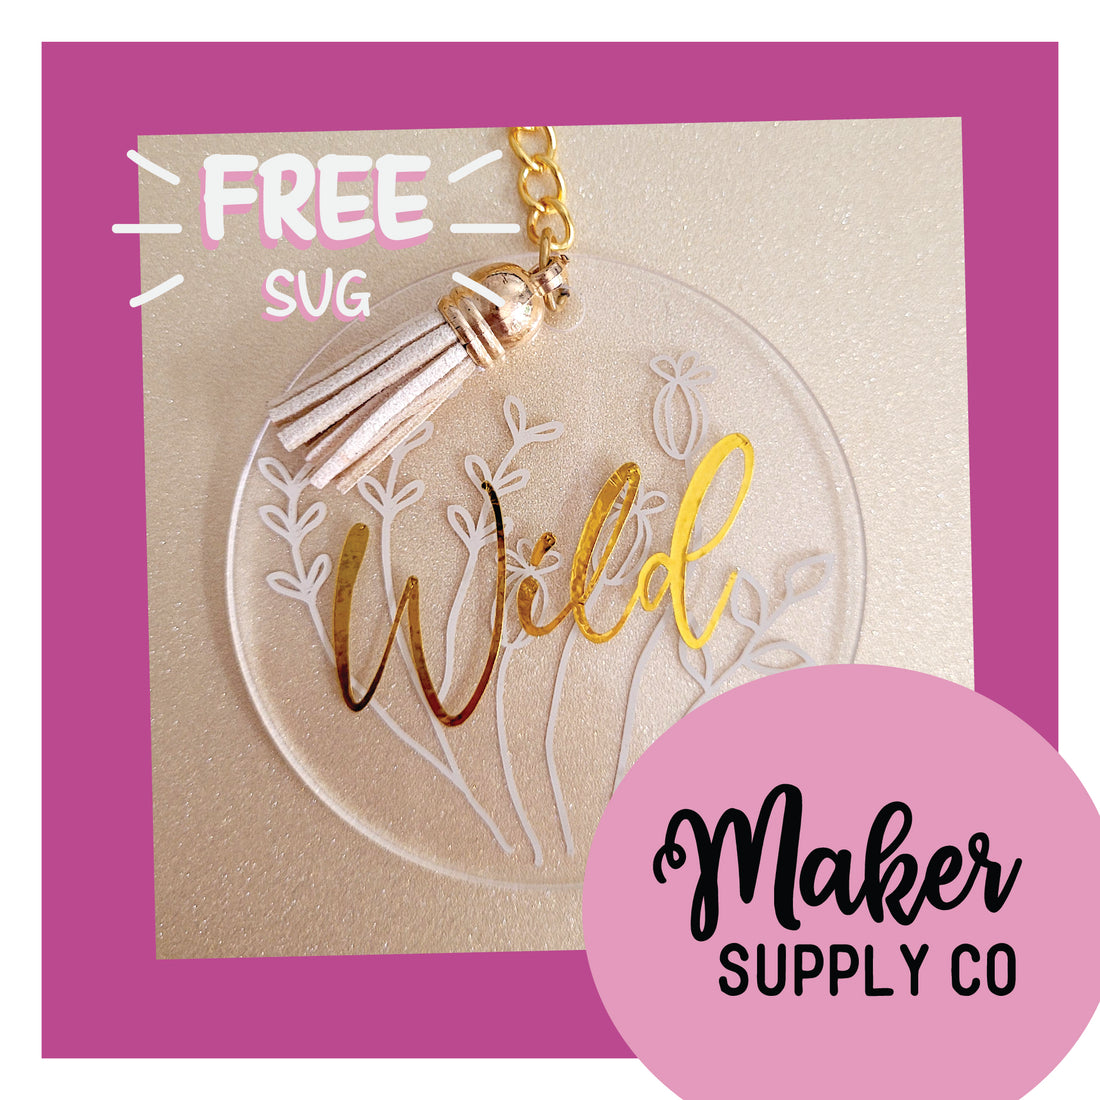 FREE wildflower SVG project to create your own acrylic keychain!